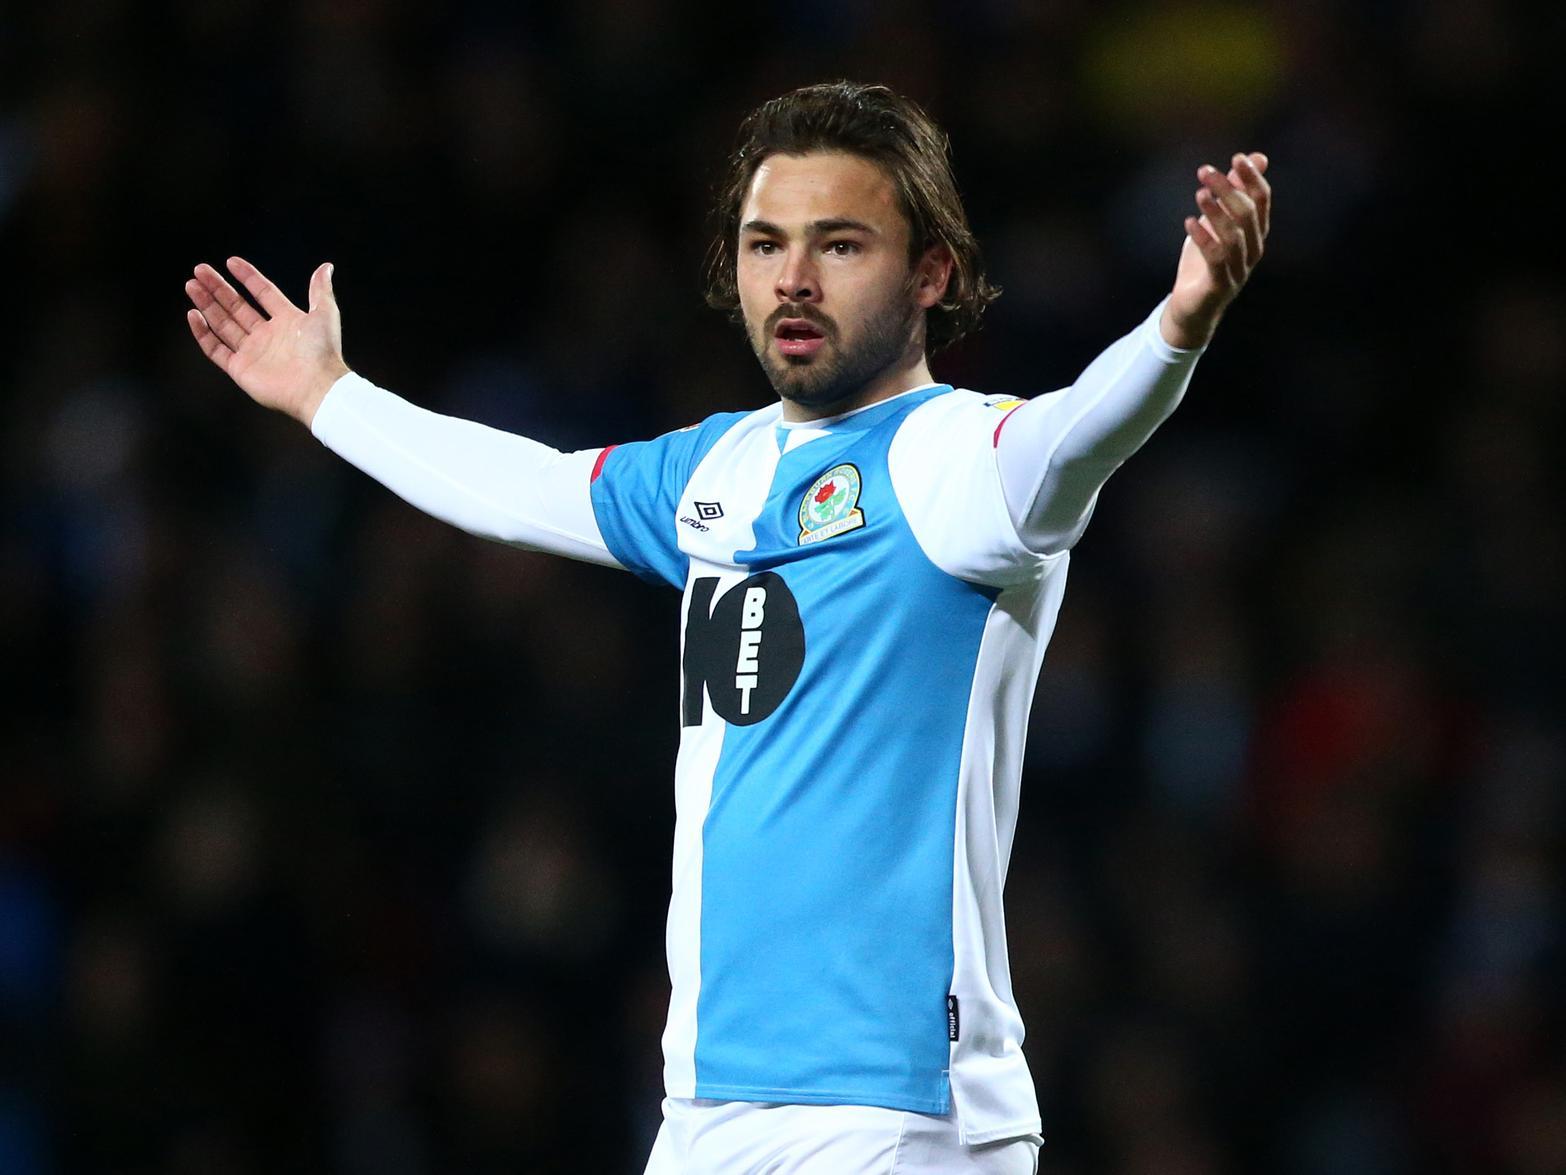 Bradley Dack (Blackburn - midfield) - had a real ding dong battle with Kalvin Phillips at Elland Road. Always looking to make things happen.